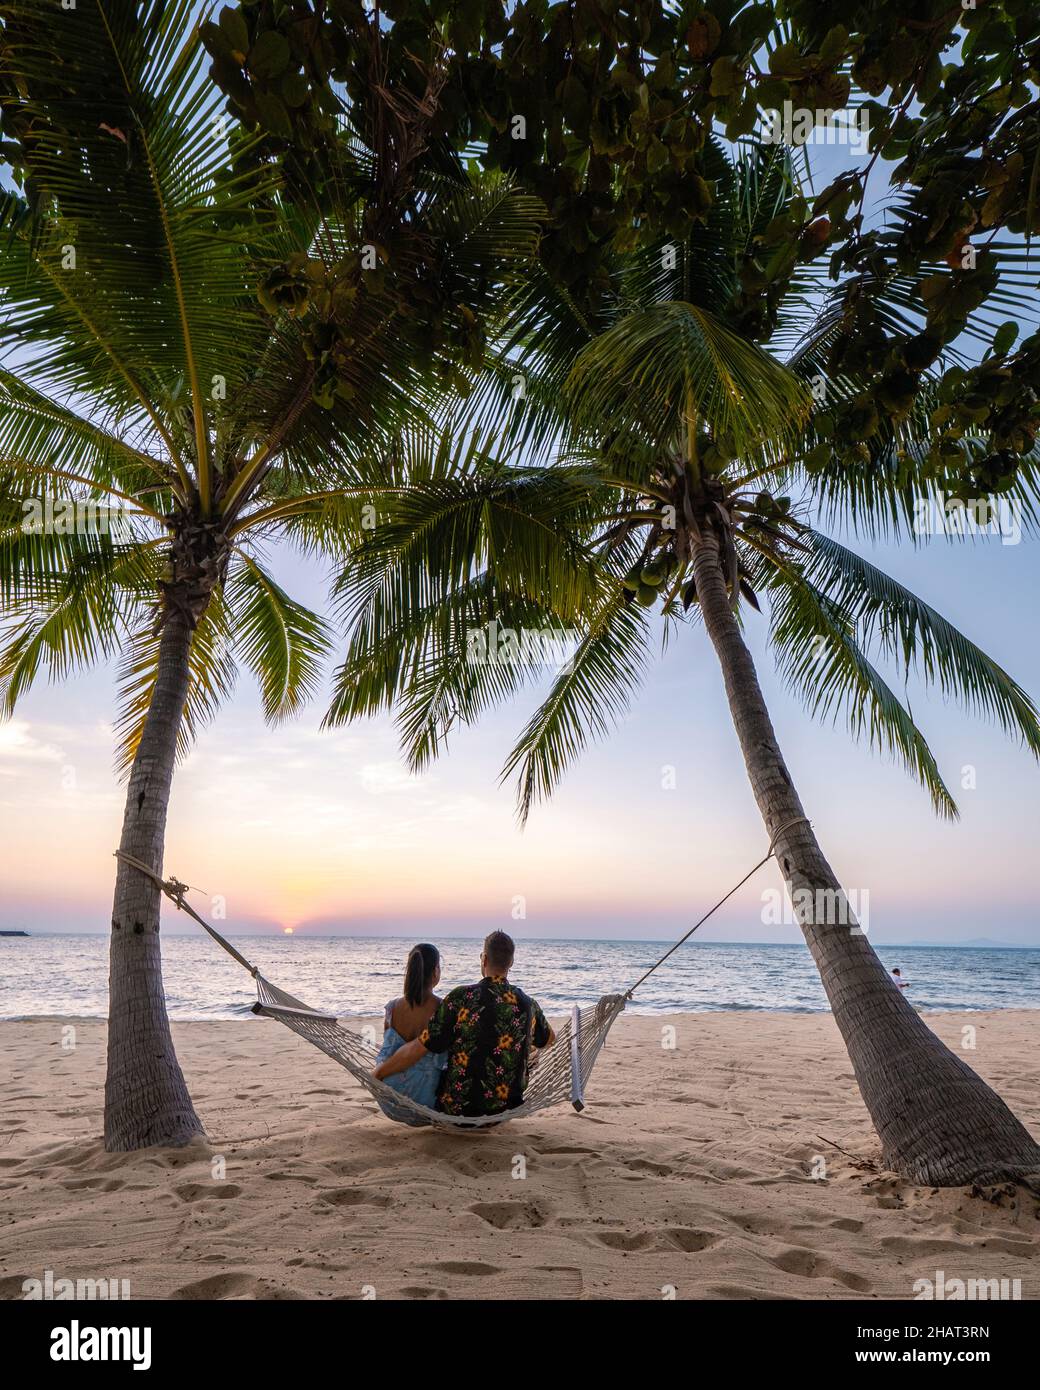 NaJomtien Pattaya Thailand, Hammock on the beach during sunset with palm trees. couple man and woman mid age watching sunset at Na Jomtien Pattaya. Asian woman and European man Stock Photo